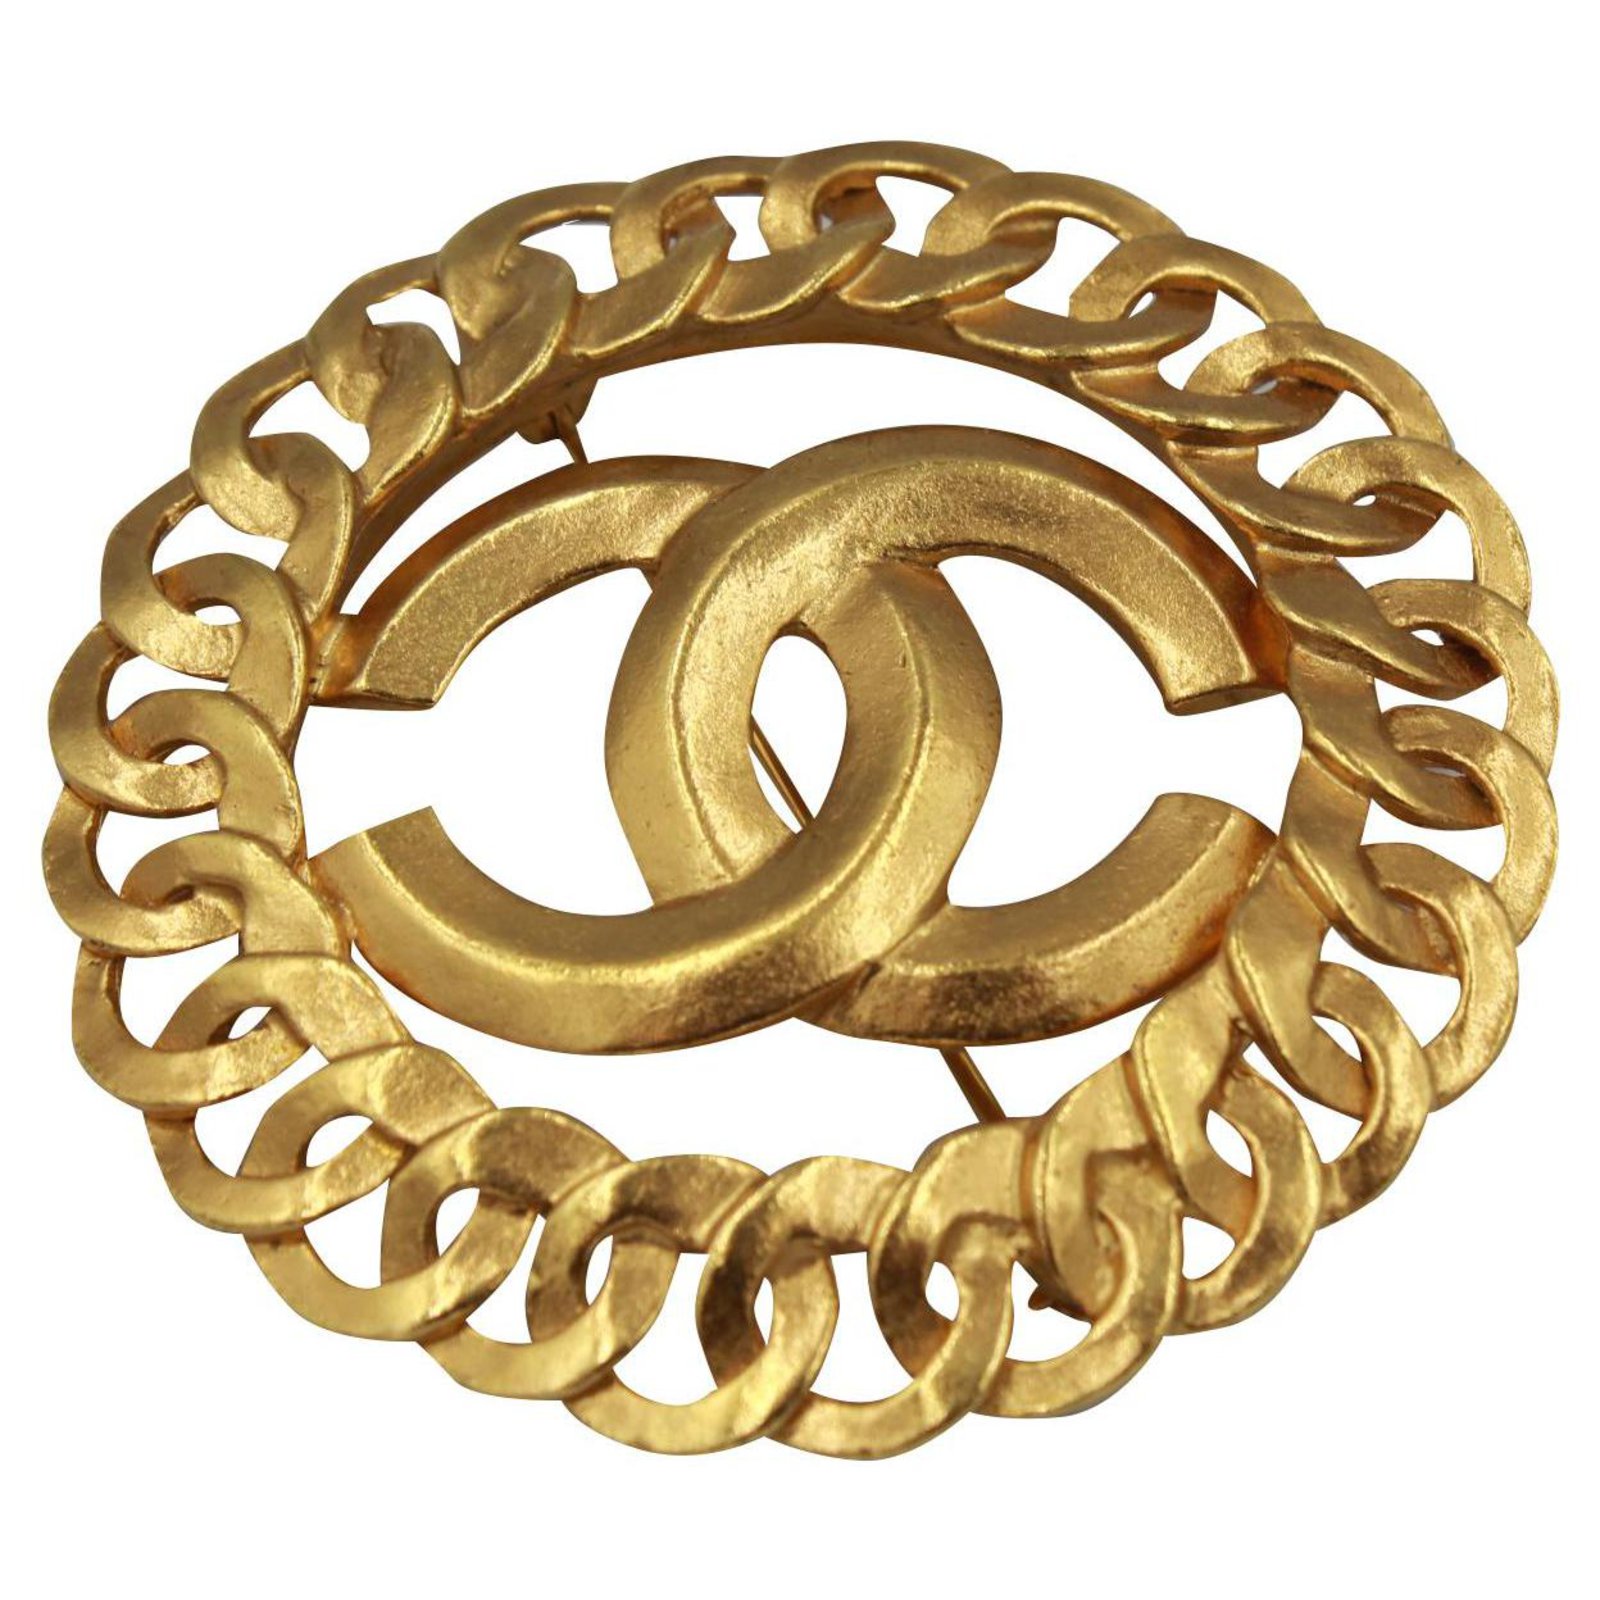 Vintage Chanel broche, double « C » in Gold metal. Golden Gold